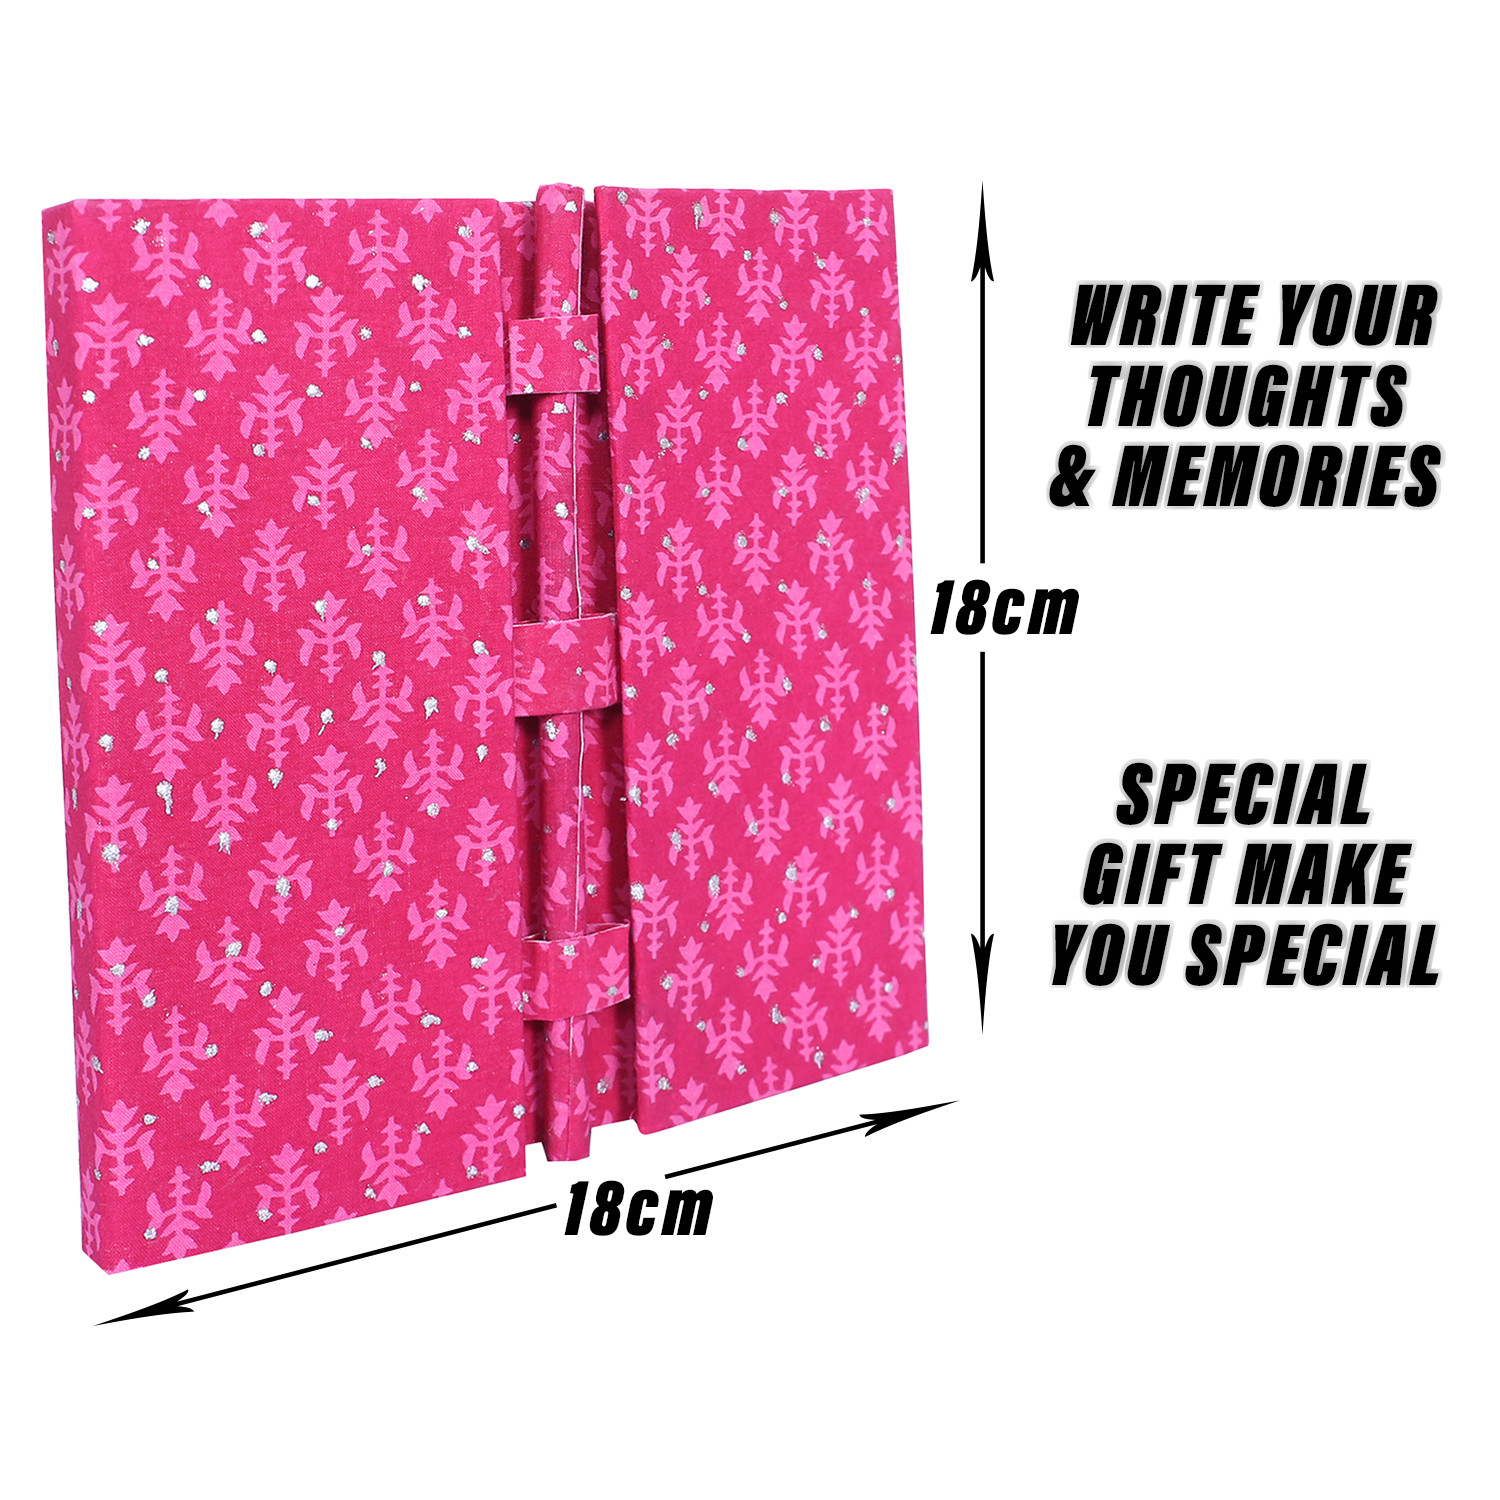 Kuber Industries Diary | Cardboard Travel Notebook | Diary for Journey | Pink Leaf Pen-Diary | Diary for Writing Thoughts & Memories | Relieve Stress | Pink